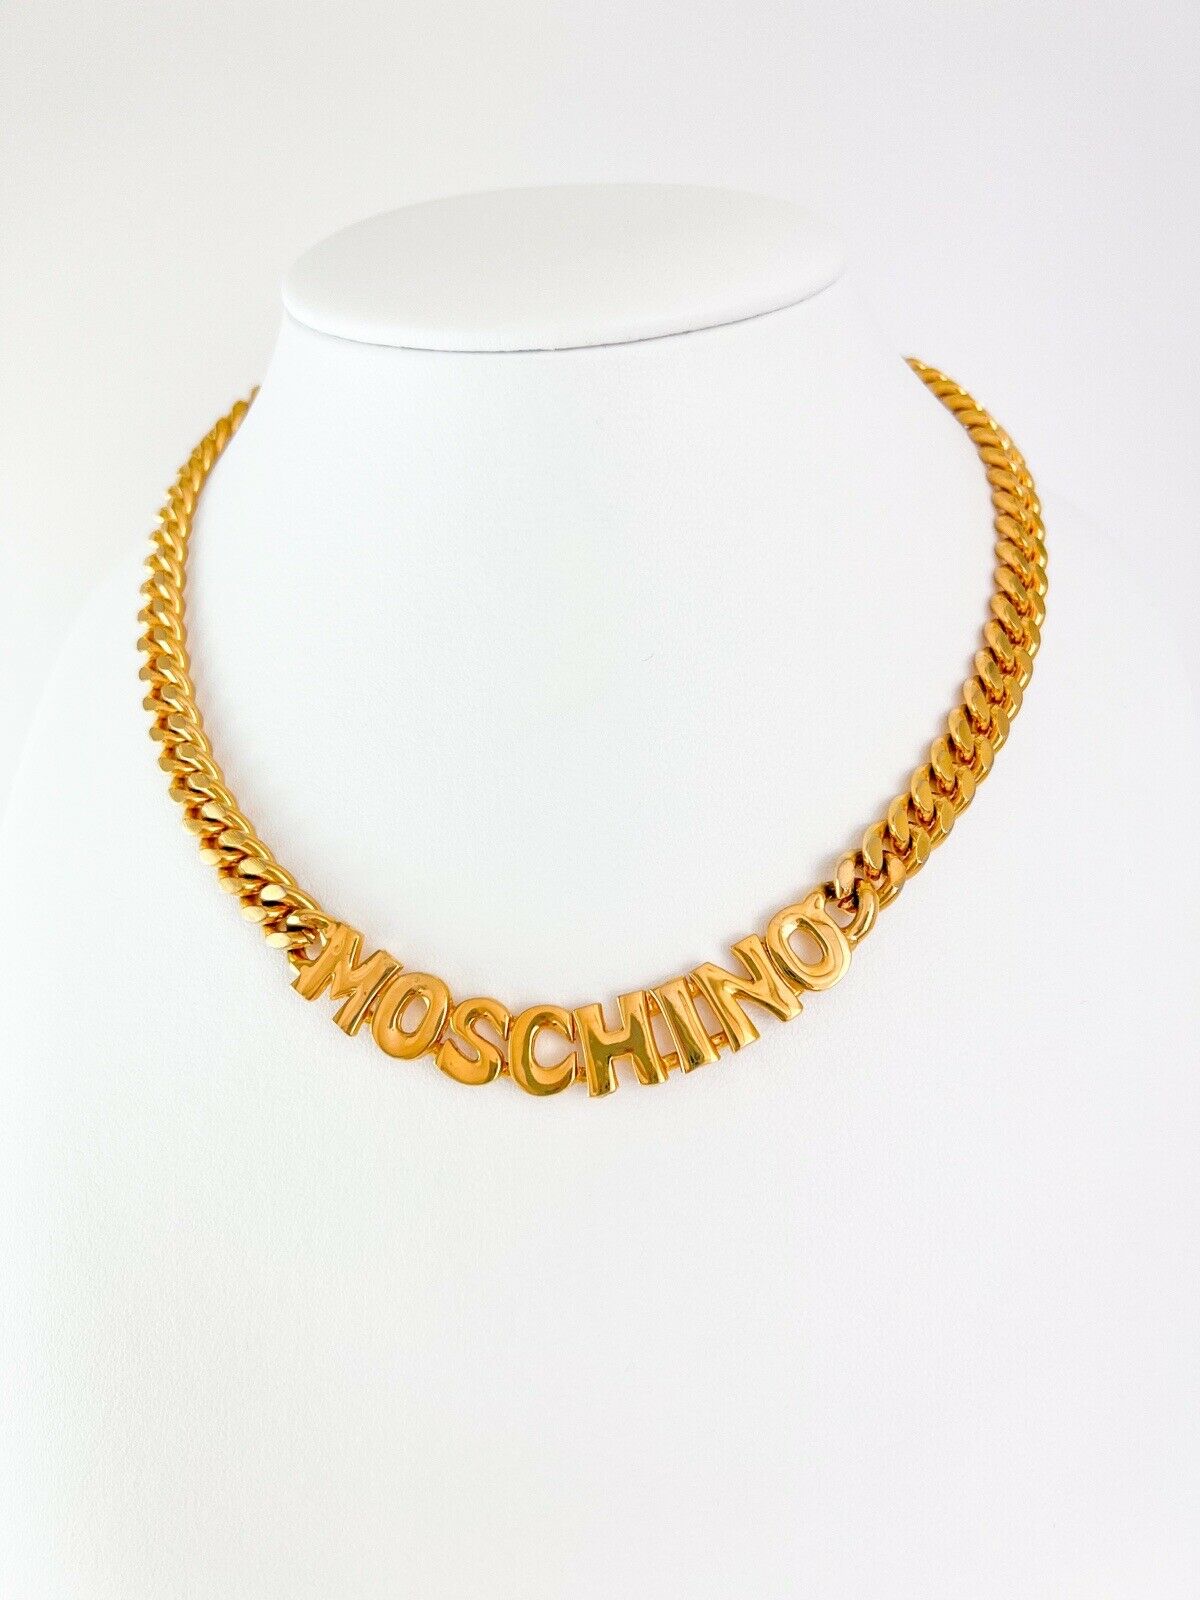 【SOLD OUT】Moschino Vintage Gold Tone Choker Necklace Chain Logo Charm